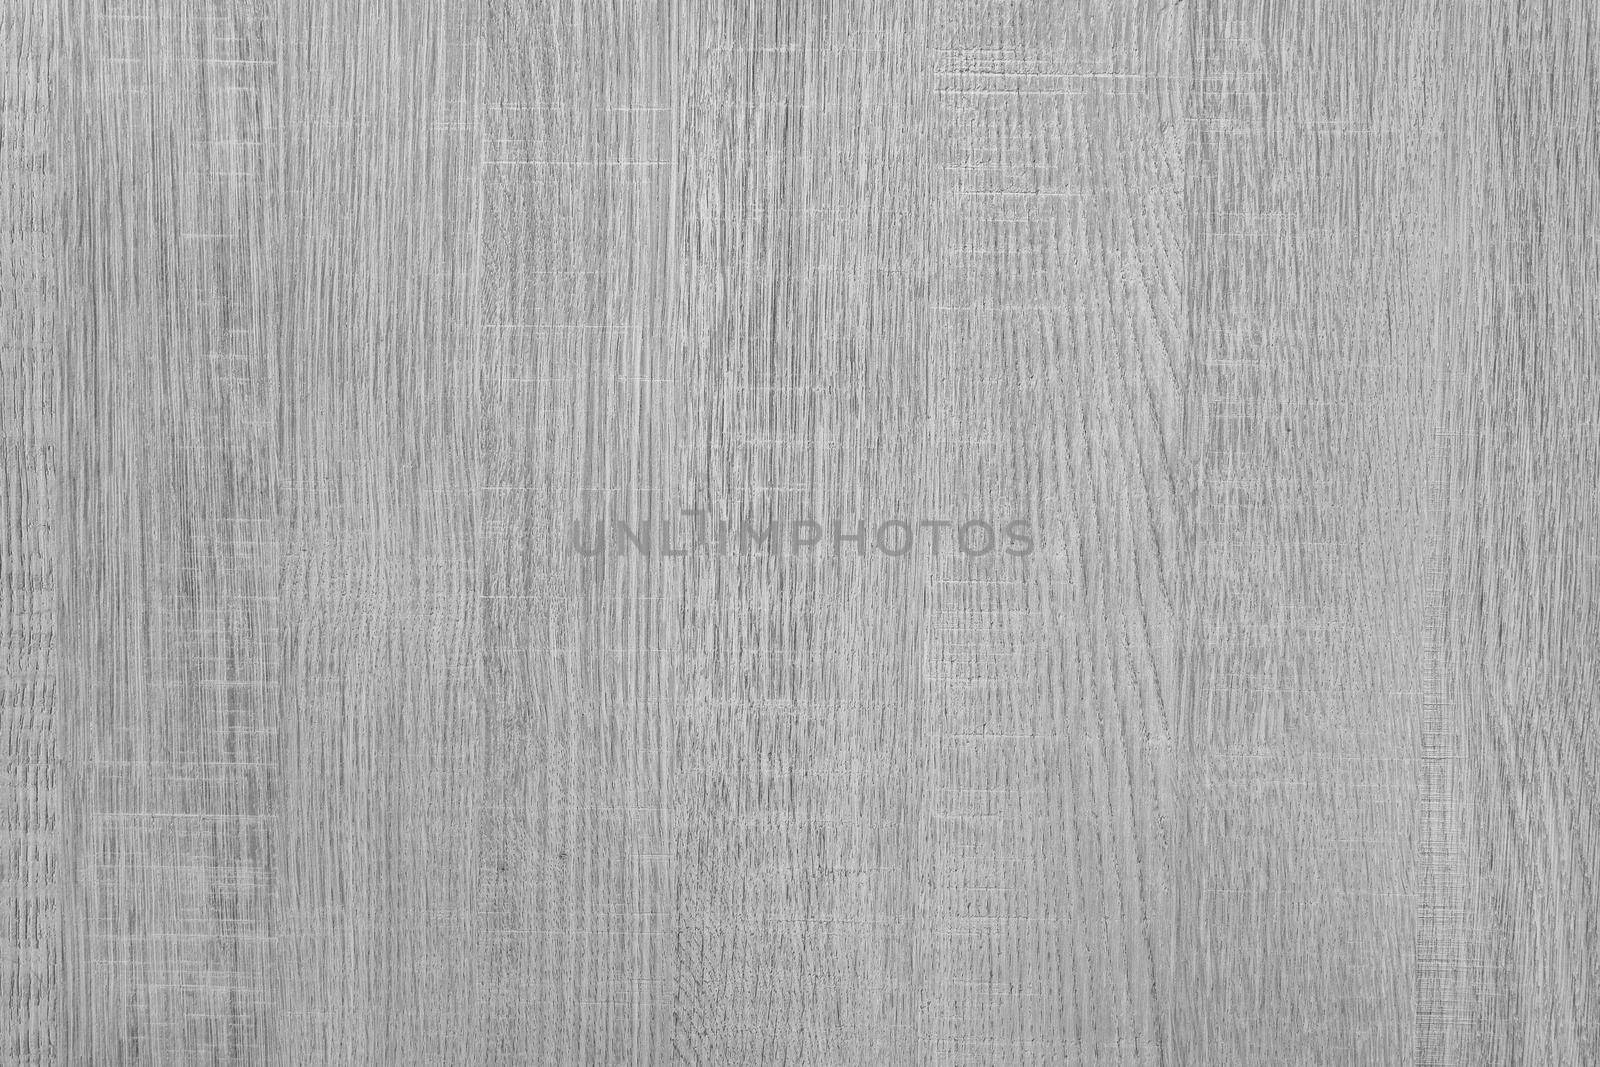 Light wooden background. Ideal for texture and background.